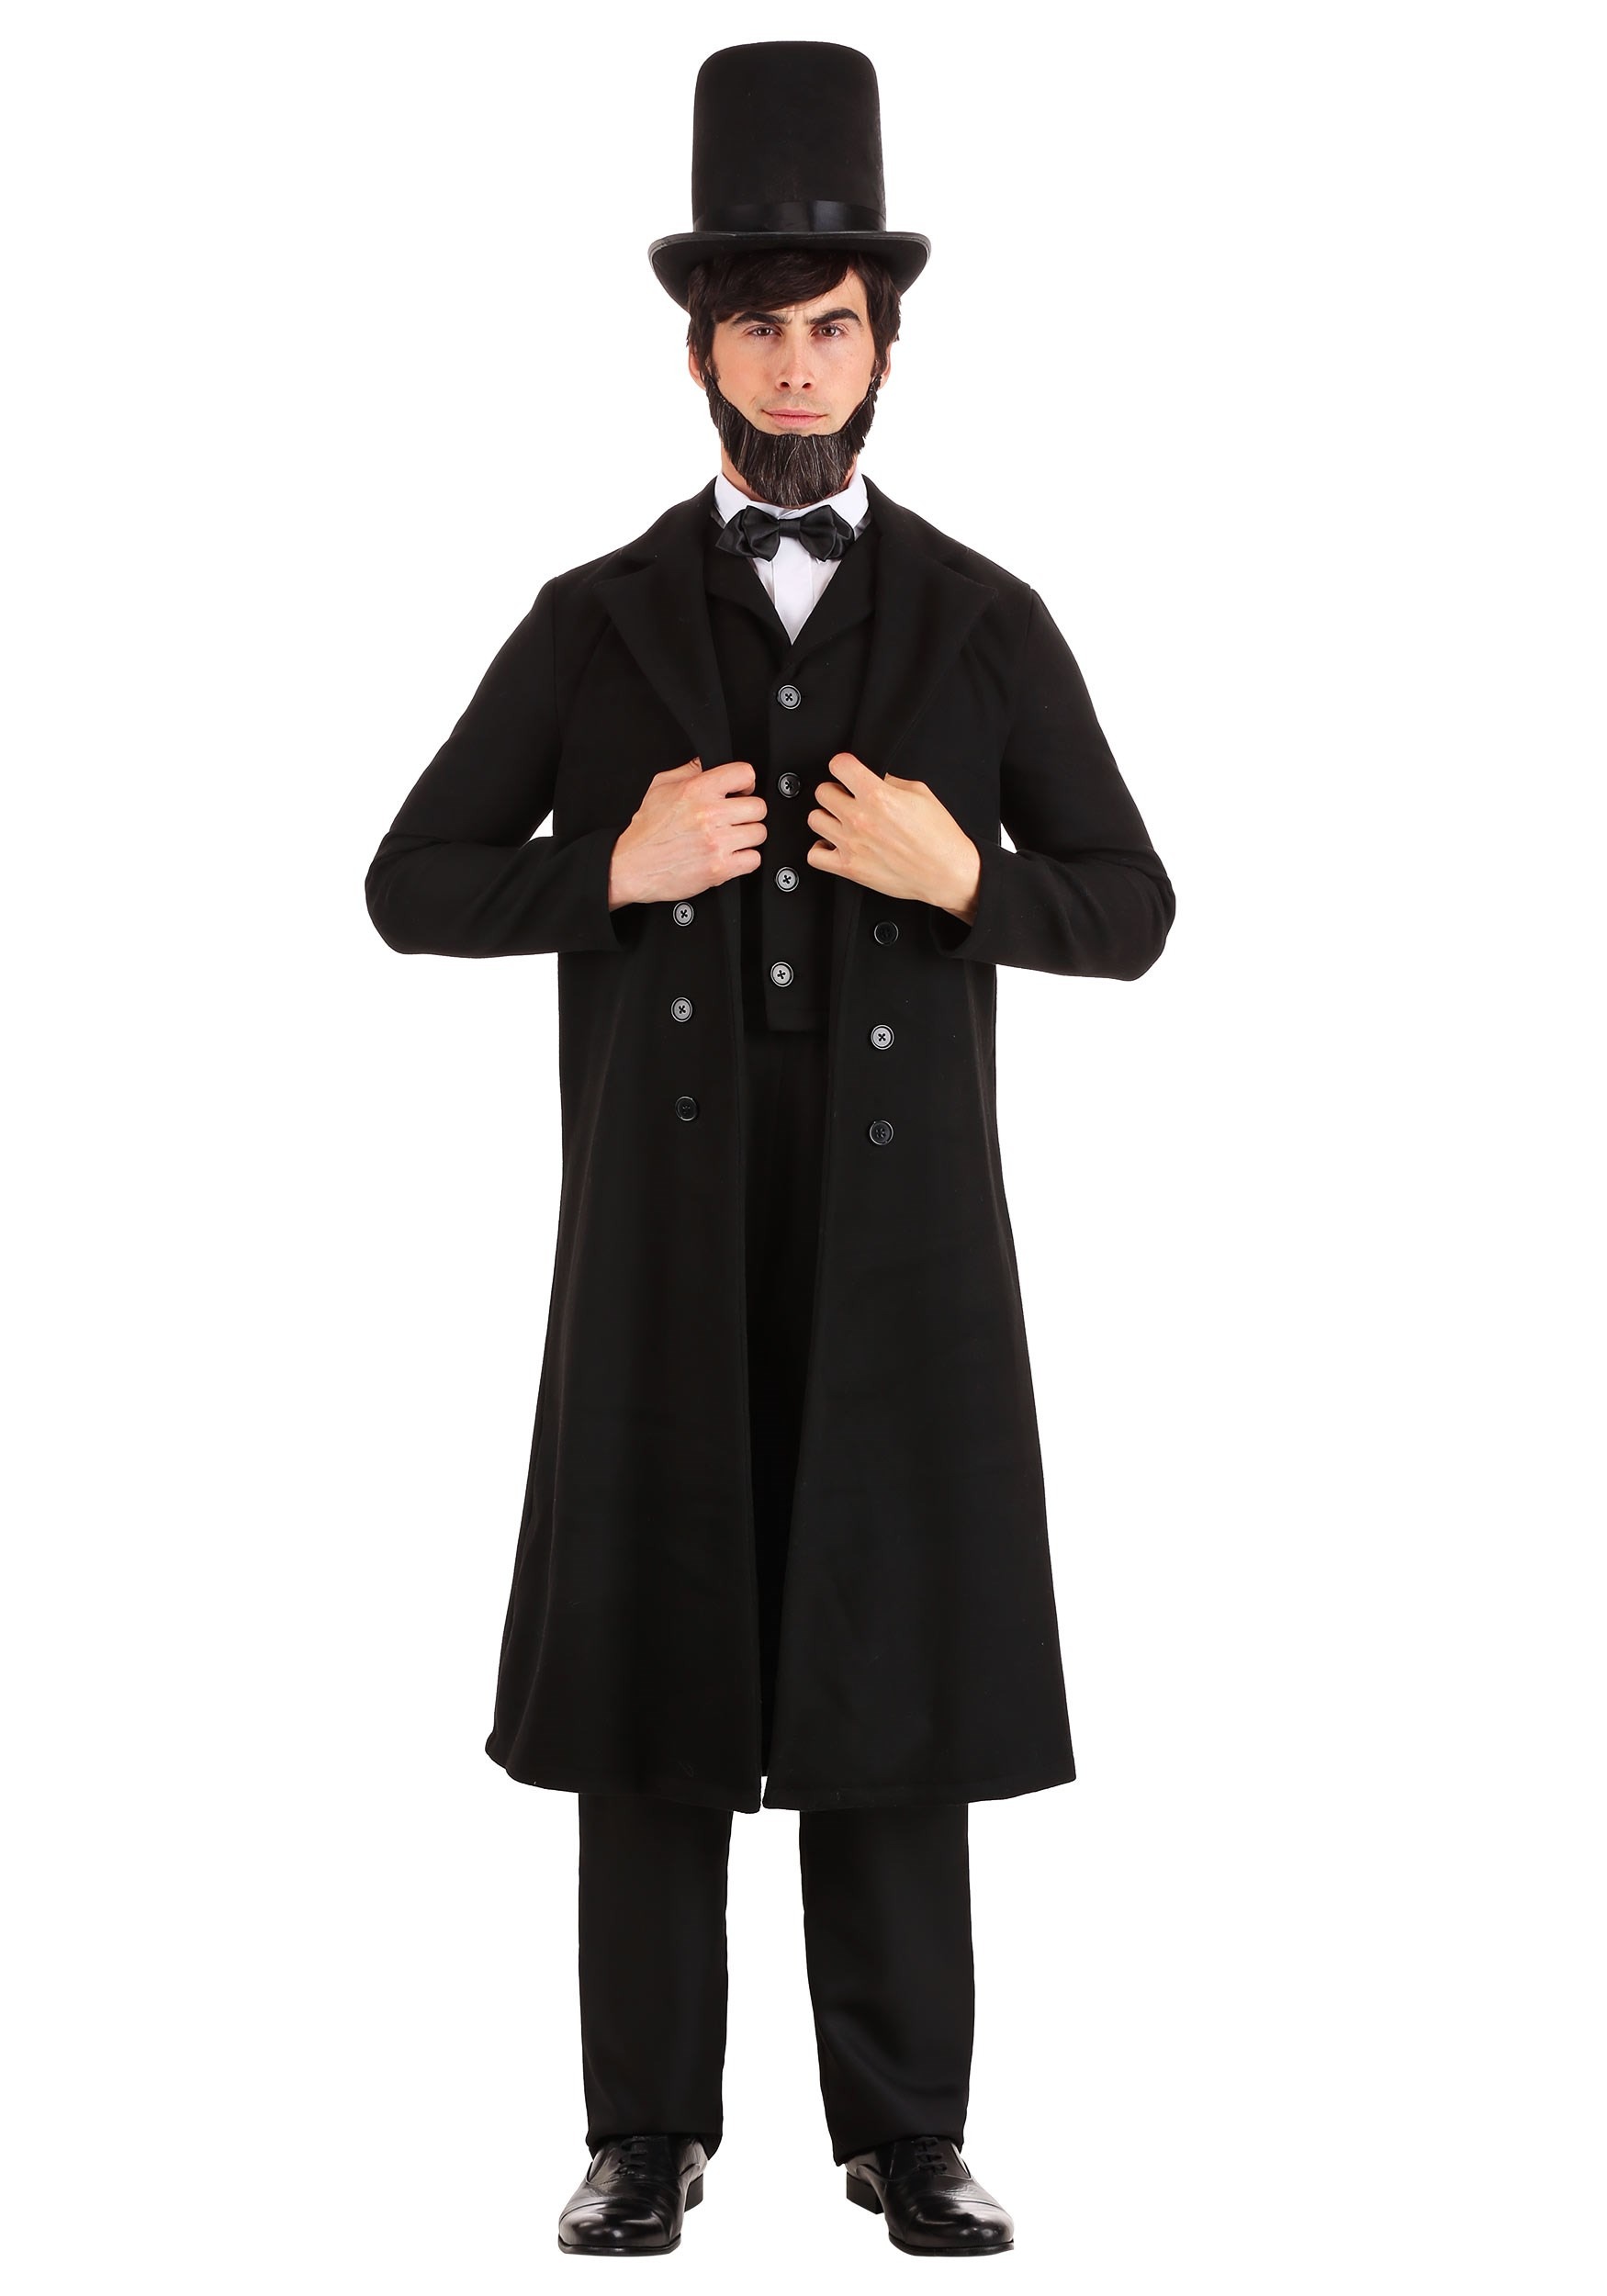 Photos - Fancy Dress President FUN Costumes  Abe Lincoln  Costume for Adults Black FU 